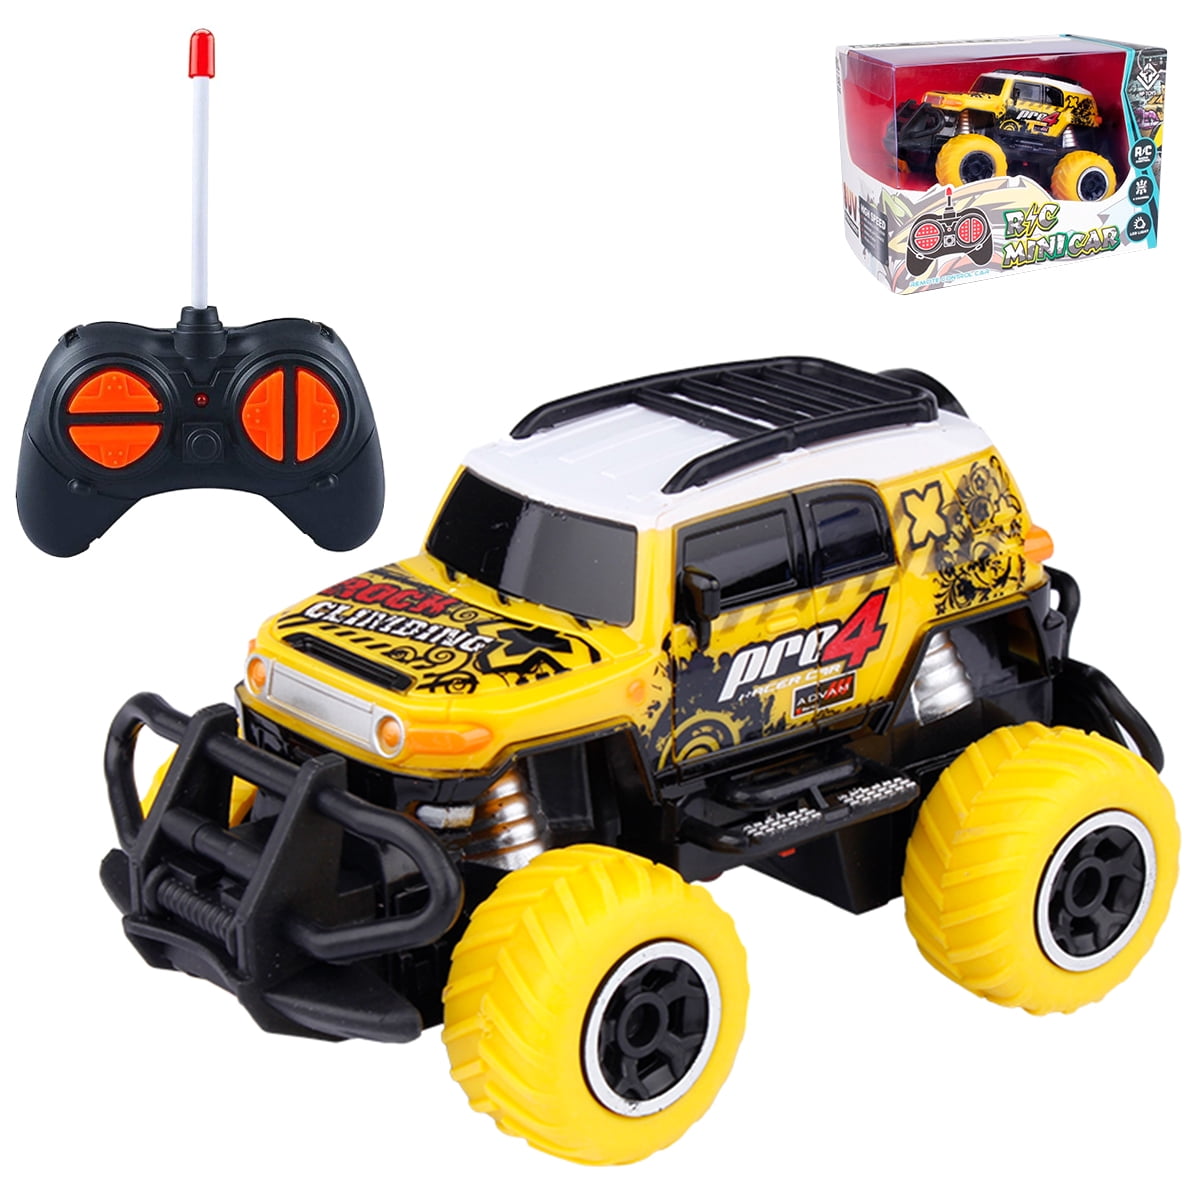 12V RC Radio Remote Control off Road Electric Race Racing Mini Car Toy For Kids 